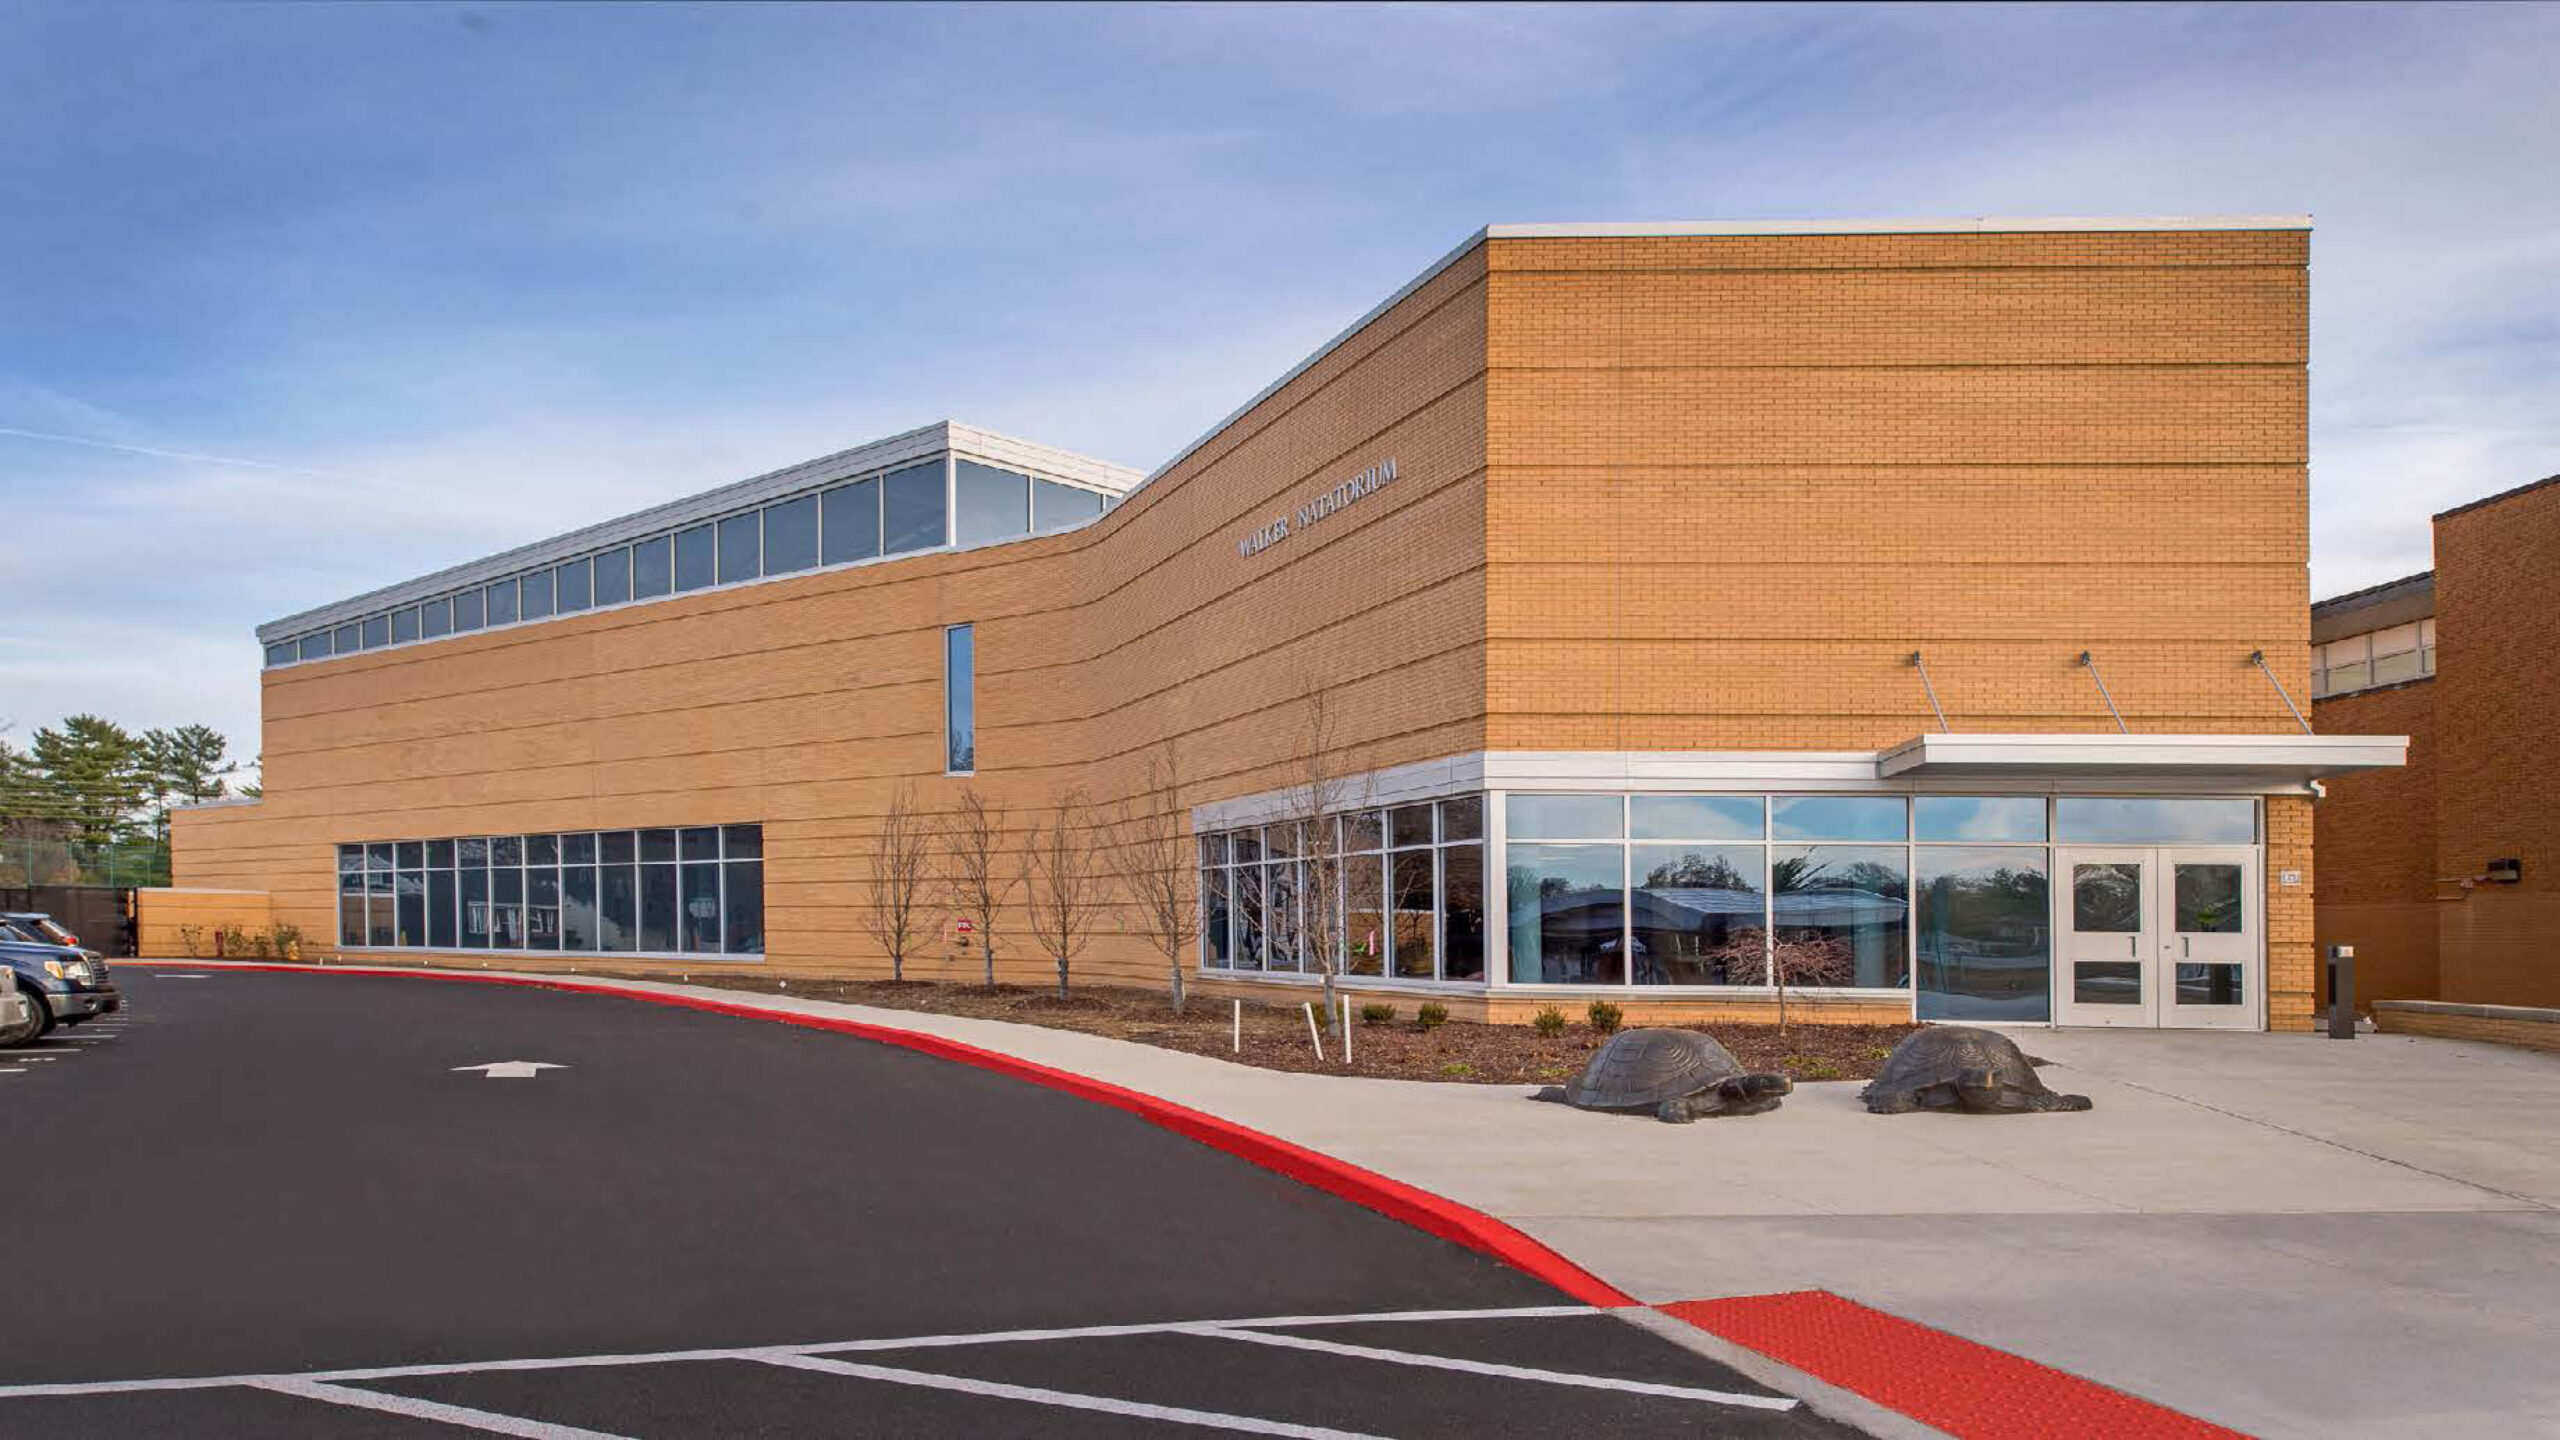 Exterior shot of an athletic center and parking lot